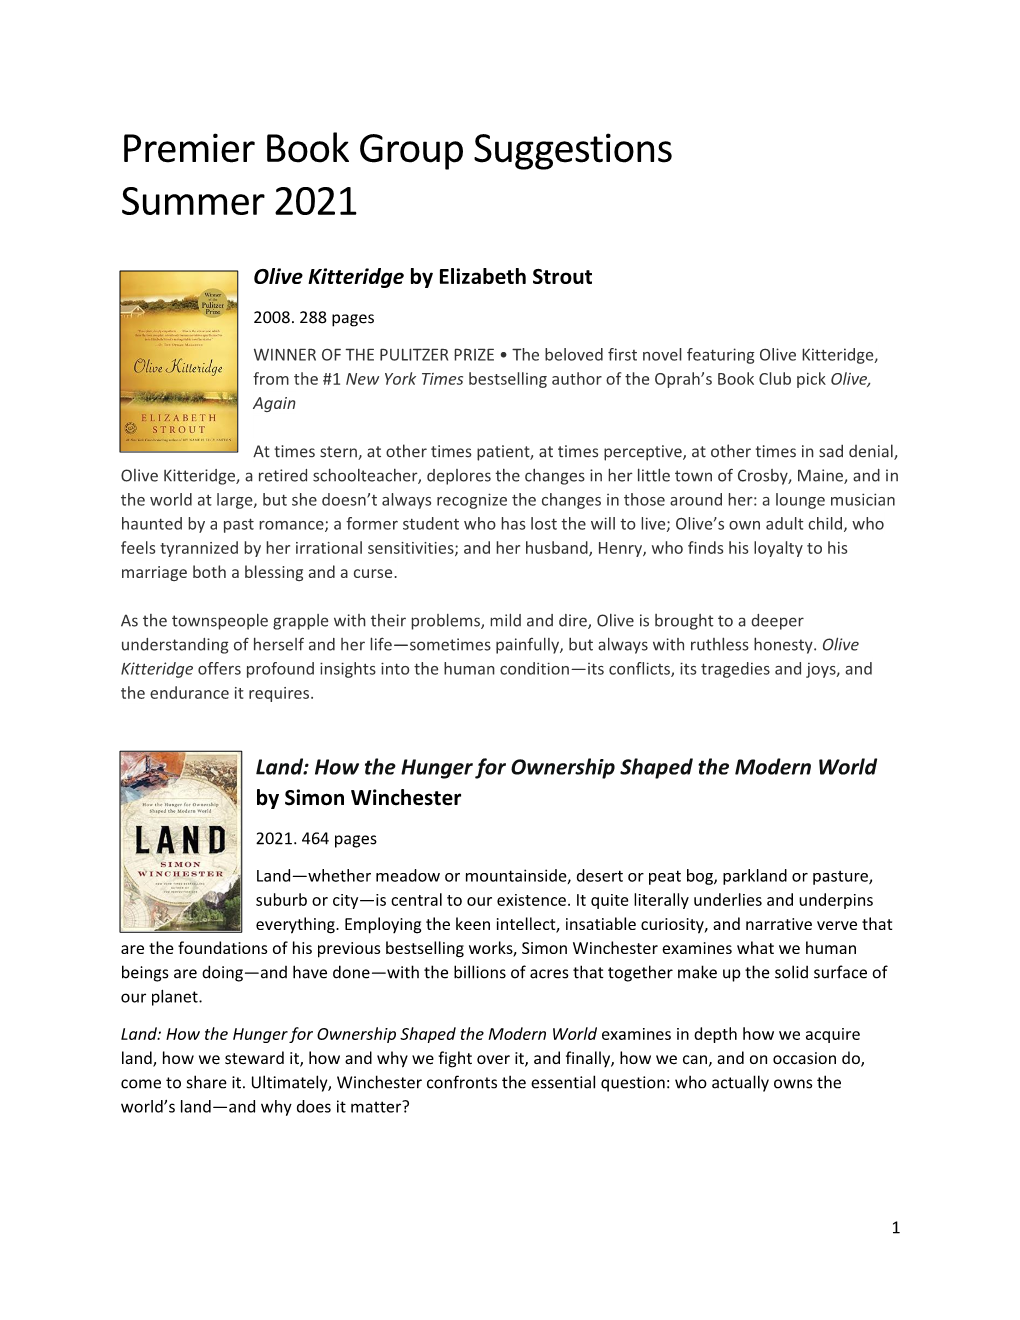 Premier Book Group Suggestions Summer 2021